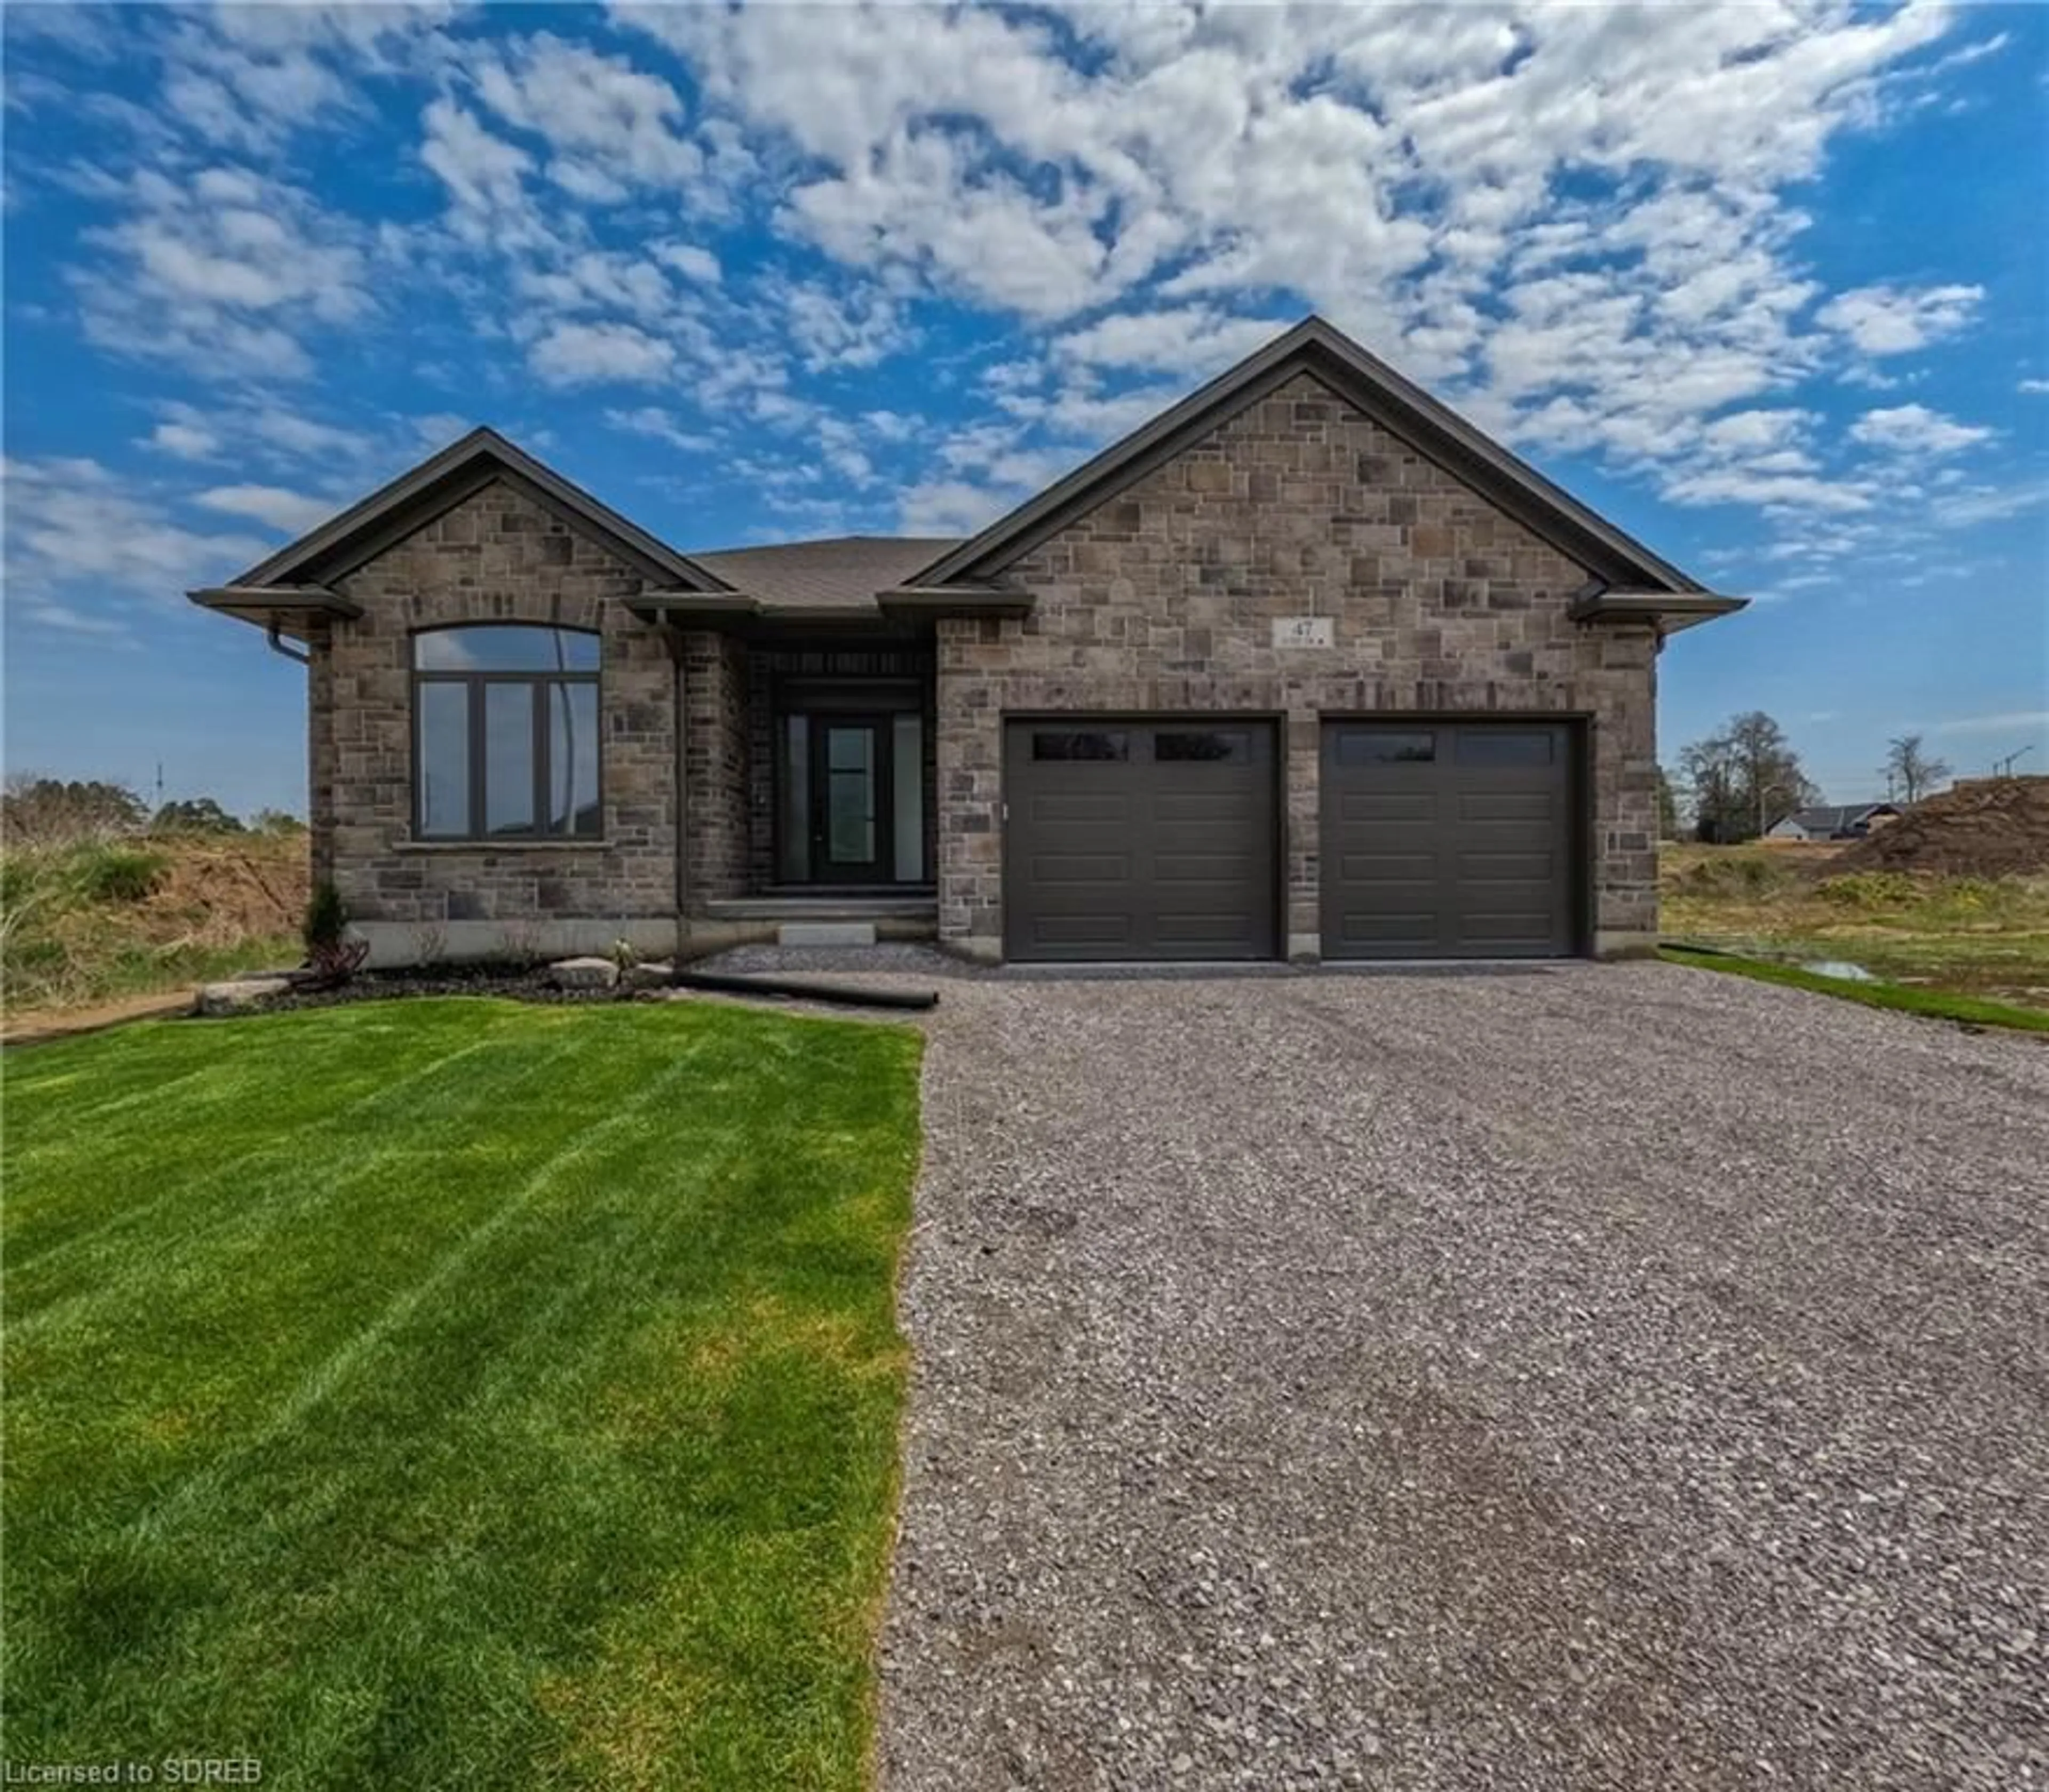 Home with brick exterior material for 47 Judd Dr, Simcoe Ontario N3Y 4Y8